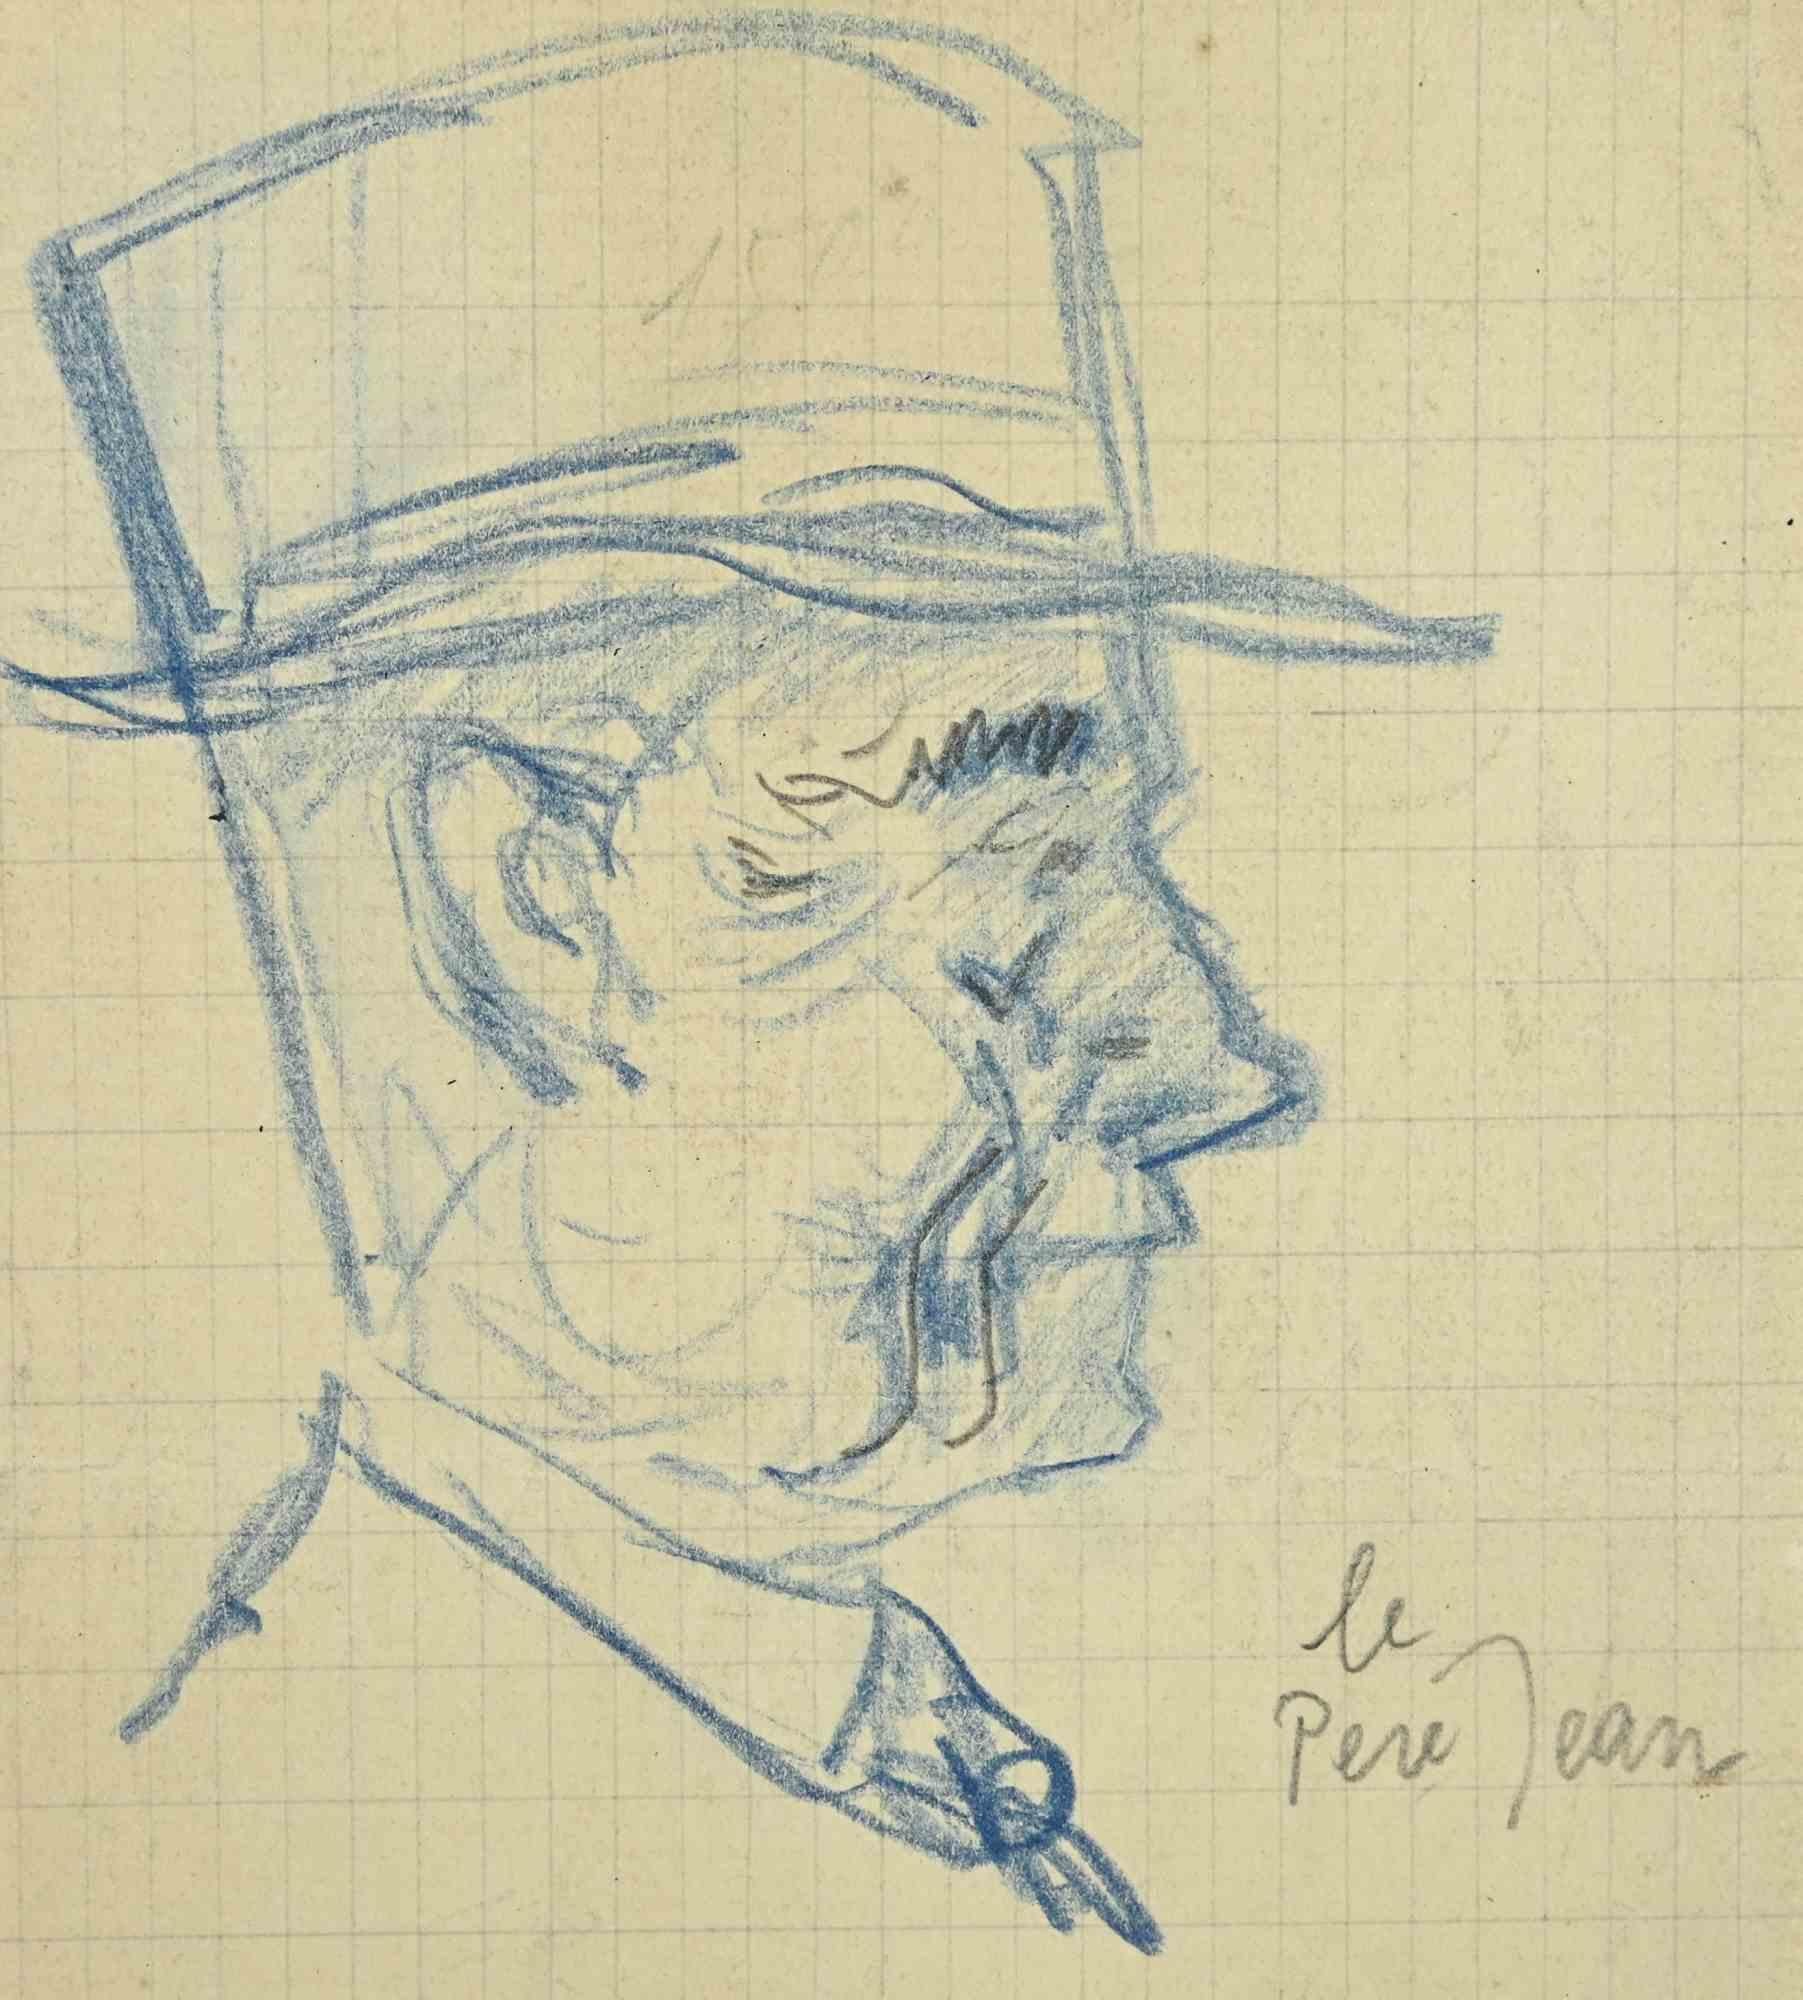 Le Pere Jean is a drawing, realized in early 20th Century, by the French Artist André Meaux Saint-Marc (1885-1941).

Pencil colored on paper. Hand Signed on back.

